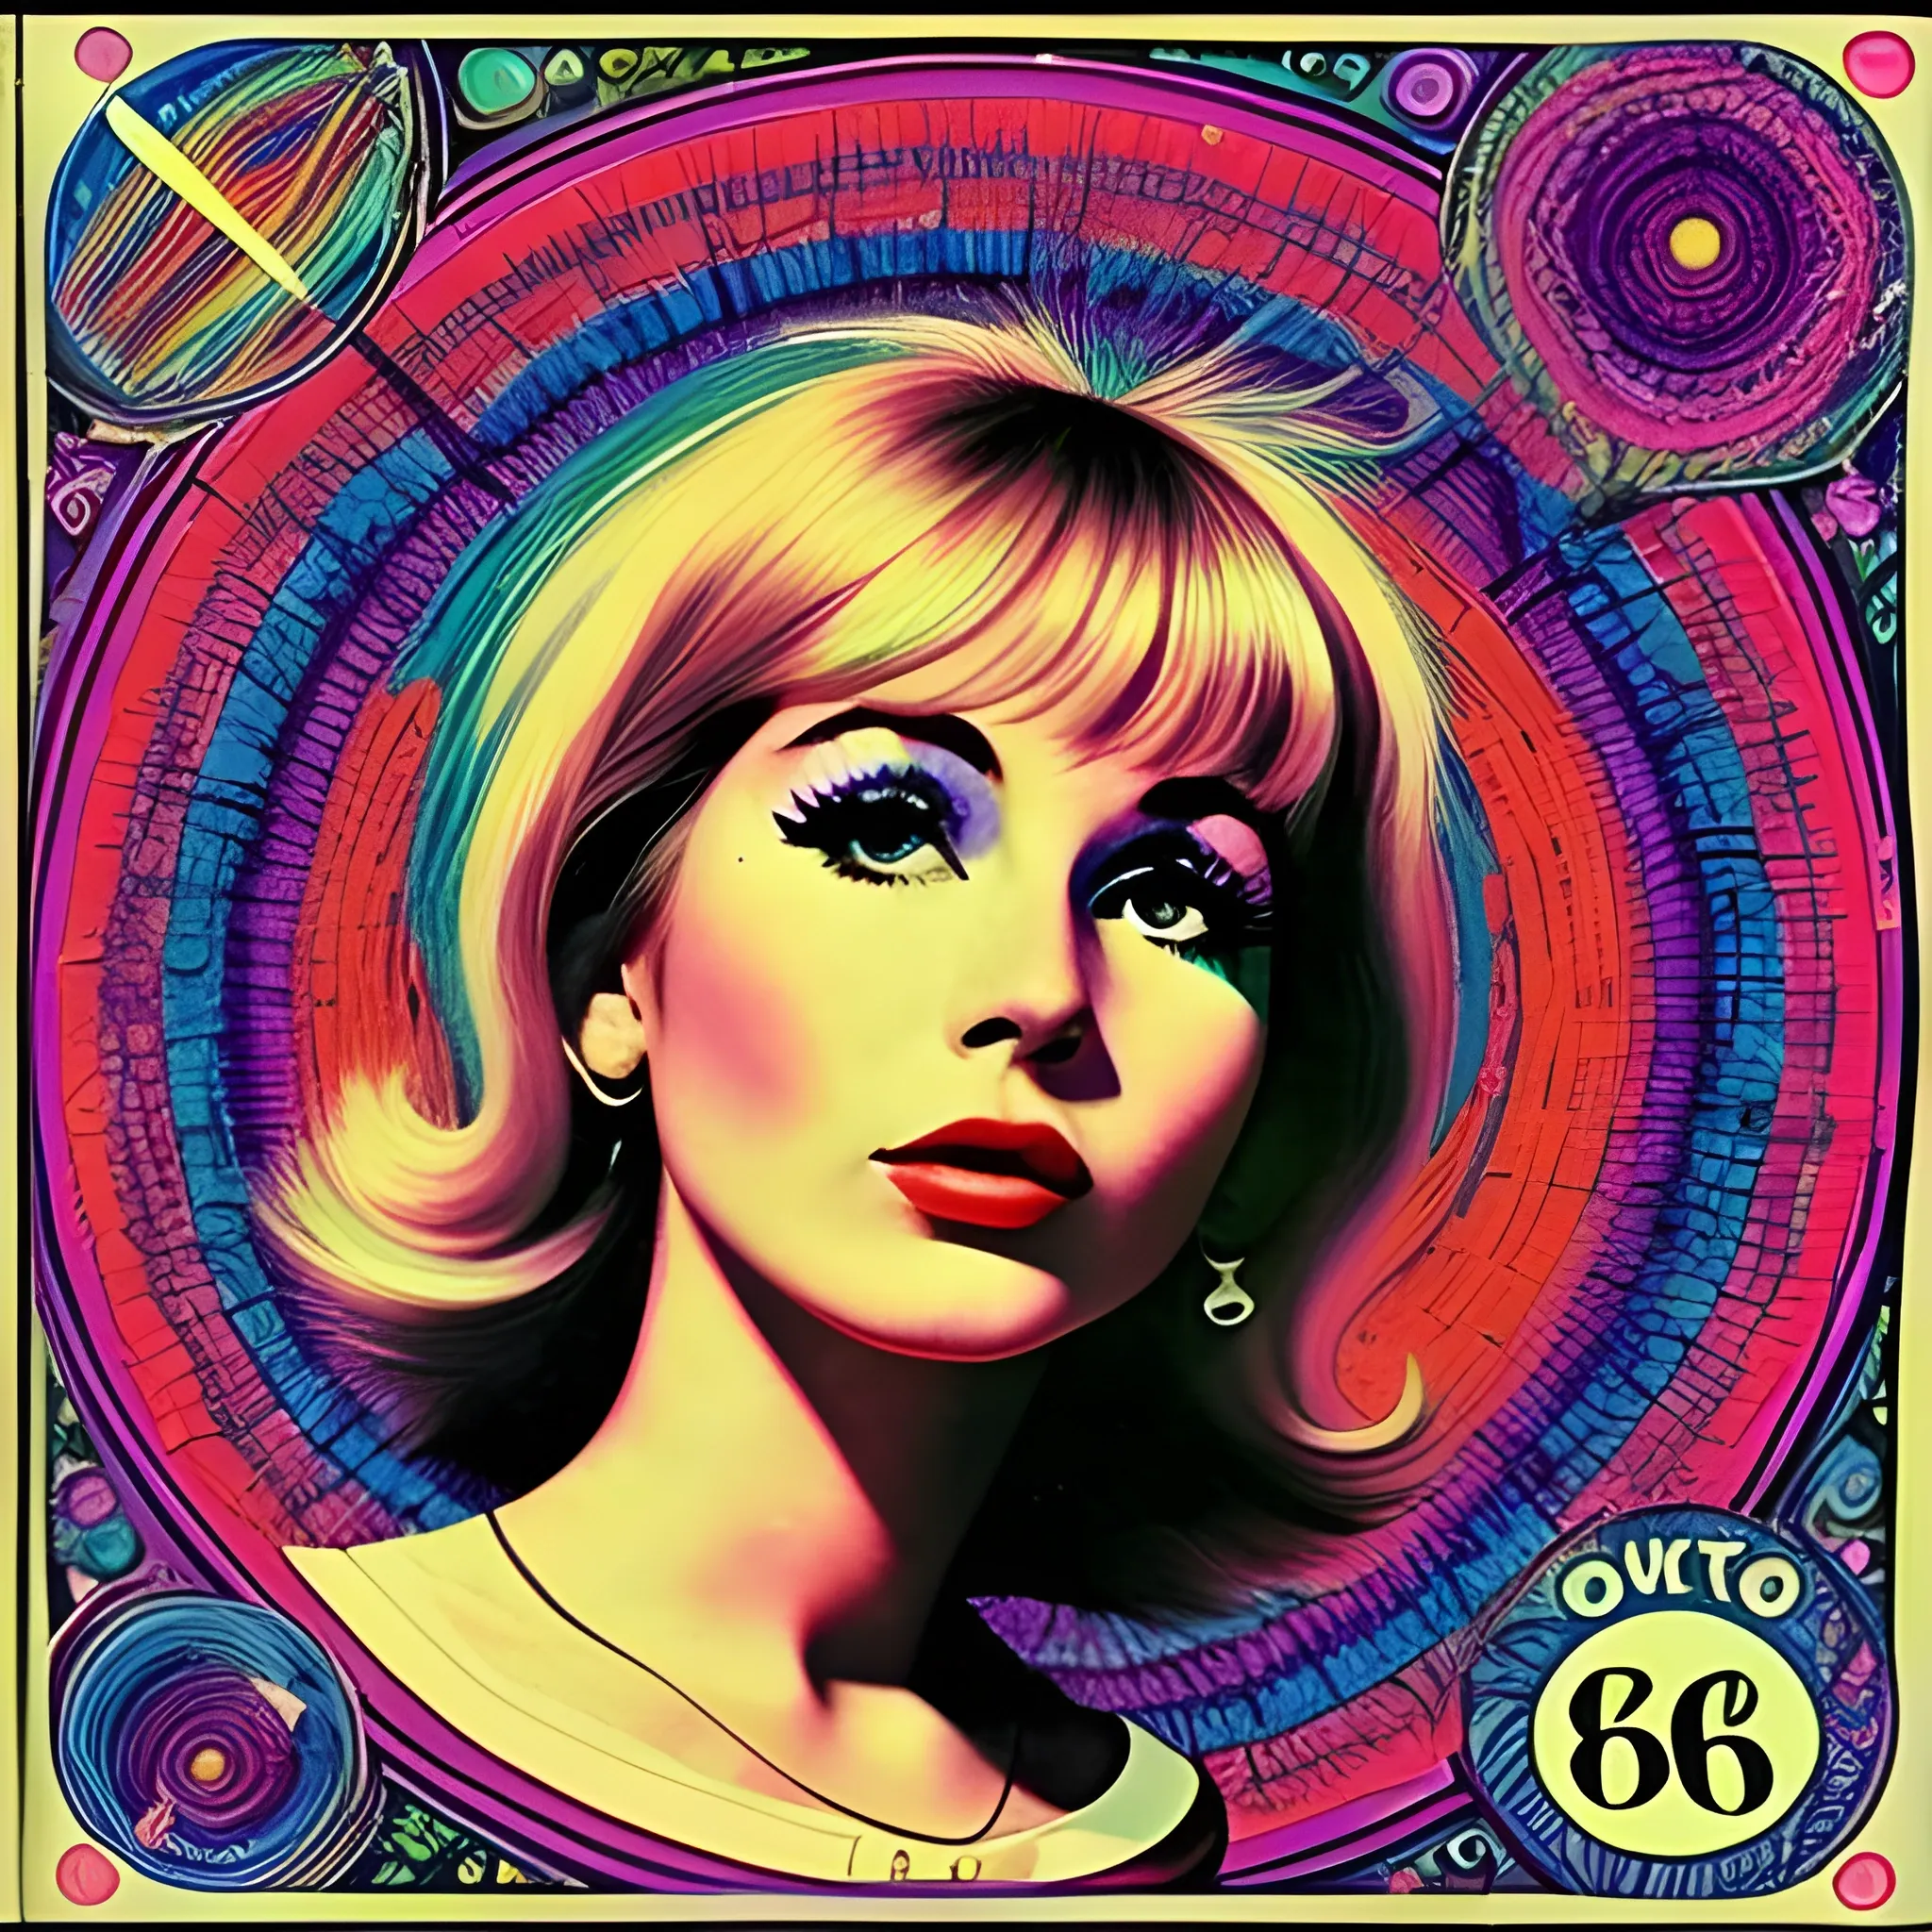 1960's, music album cover, hippy chick, psychedelic